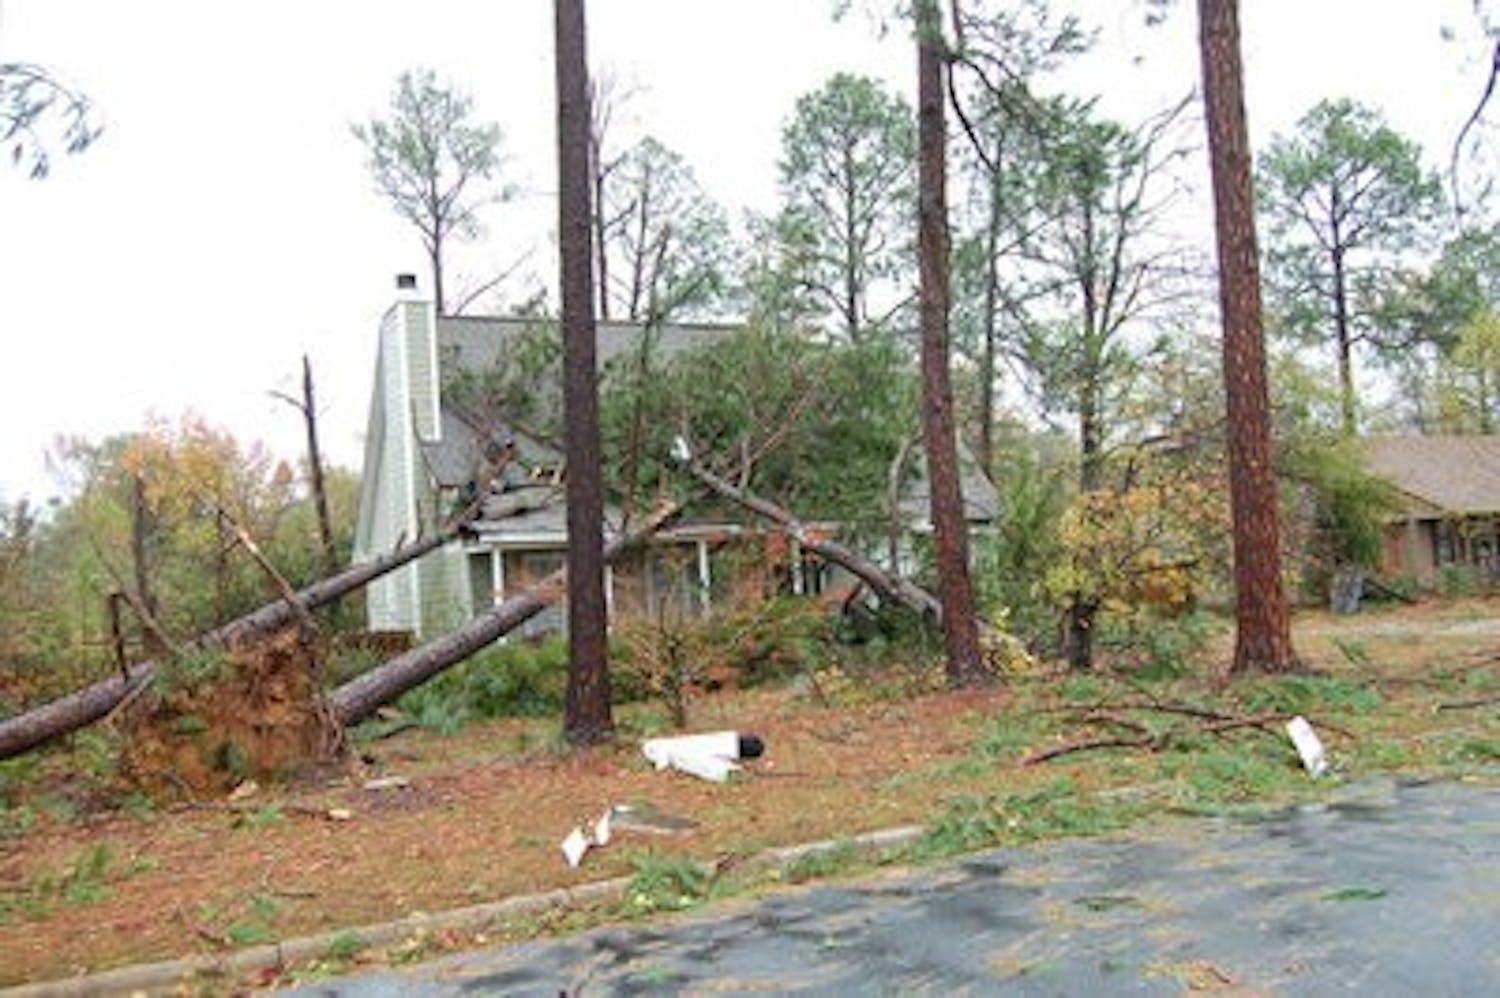 Two tornadoes touched down in Auburn Nov. 16, 2011 damaging approximately 237 structures, like this home on Elkins Drive. The storms also downed about 1,000 trees. Auburn Public Works estimates another 2-3 weeks until all debris is cleared. (Kate Jones / INTRIGUE EDITOR)